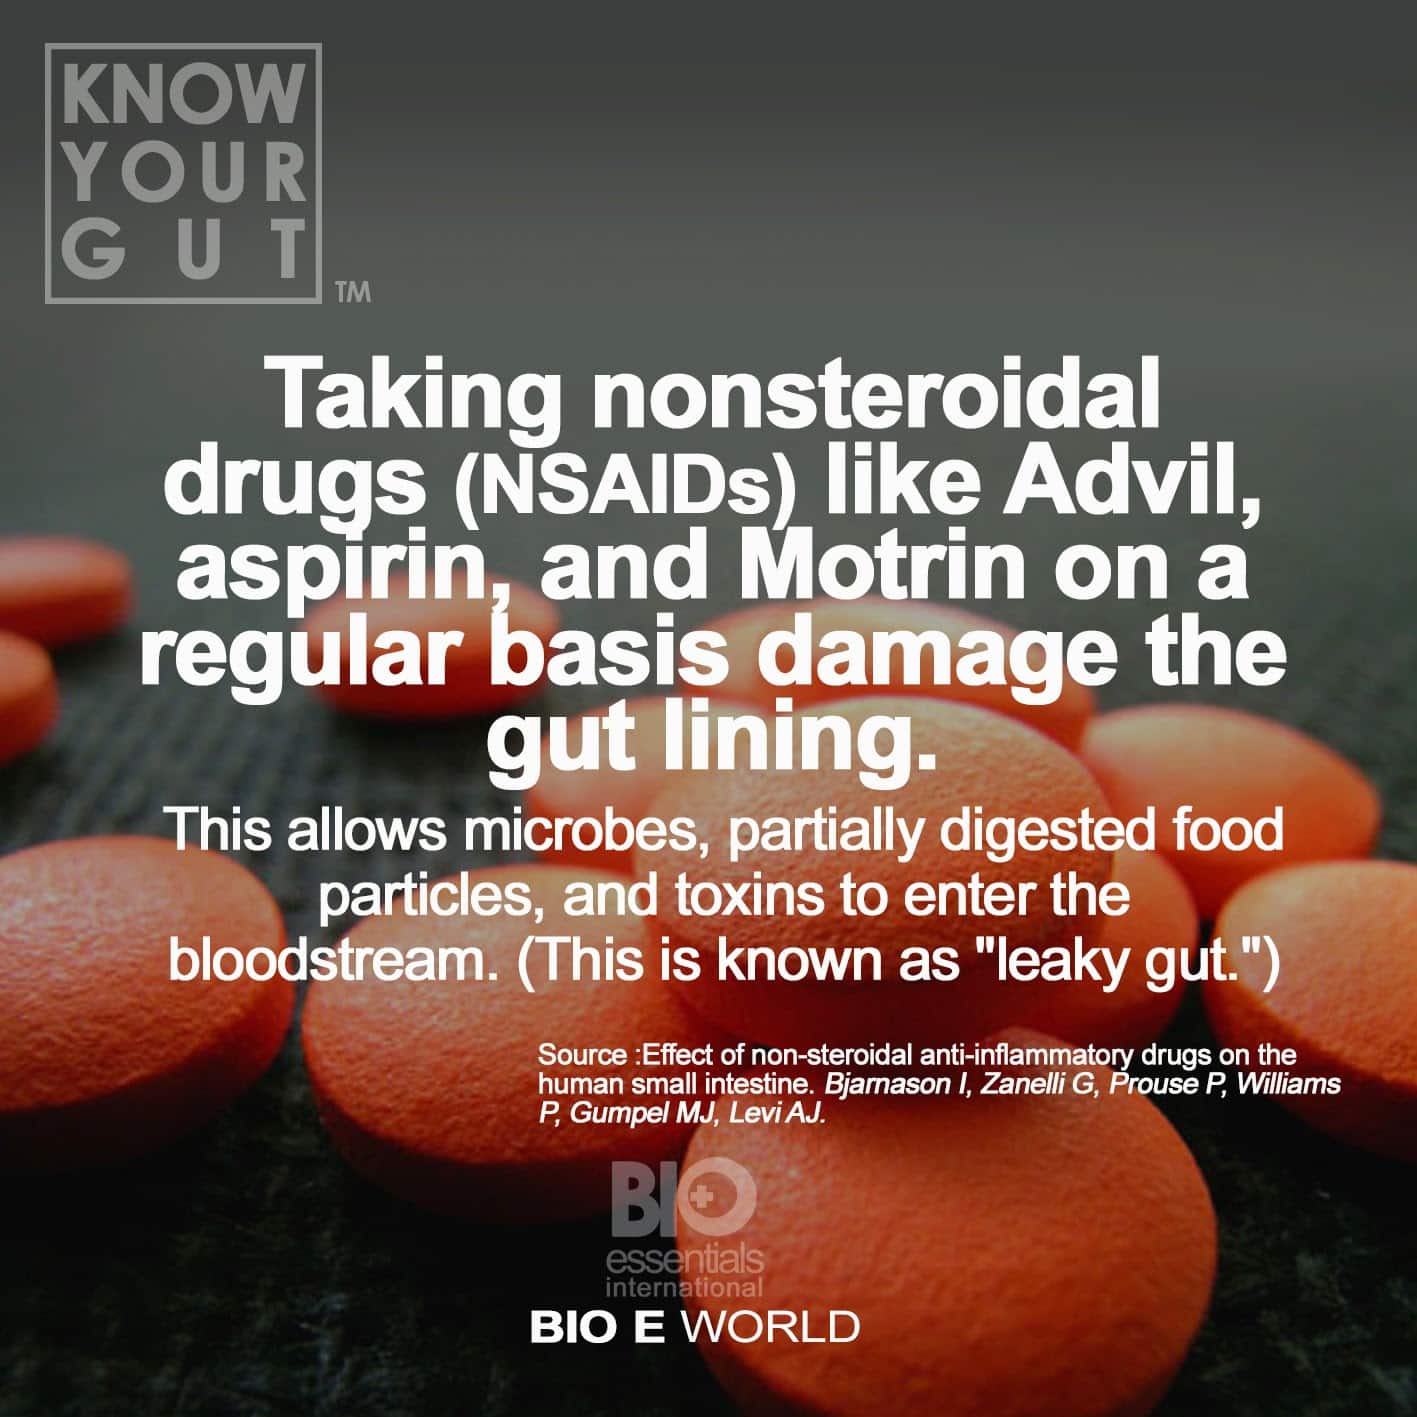 Why are NSAIDs hard on the stomach?